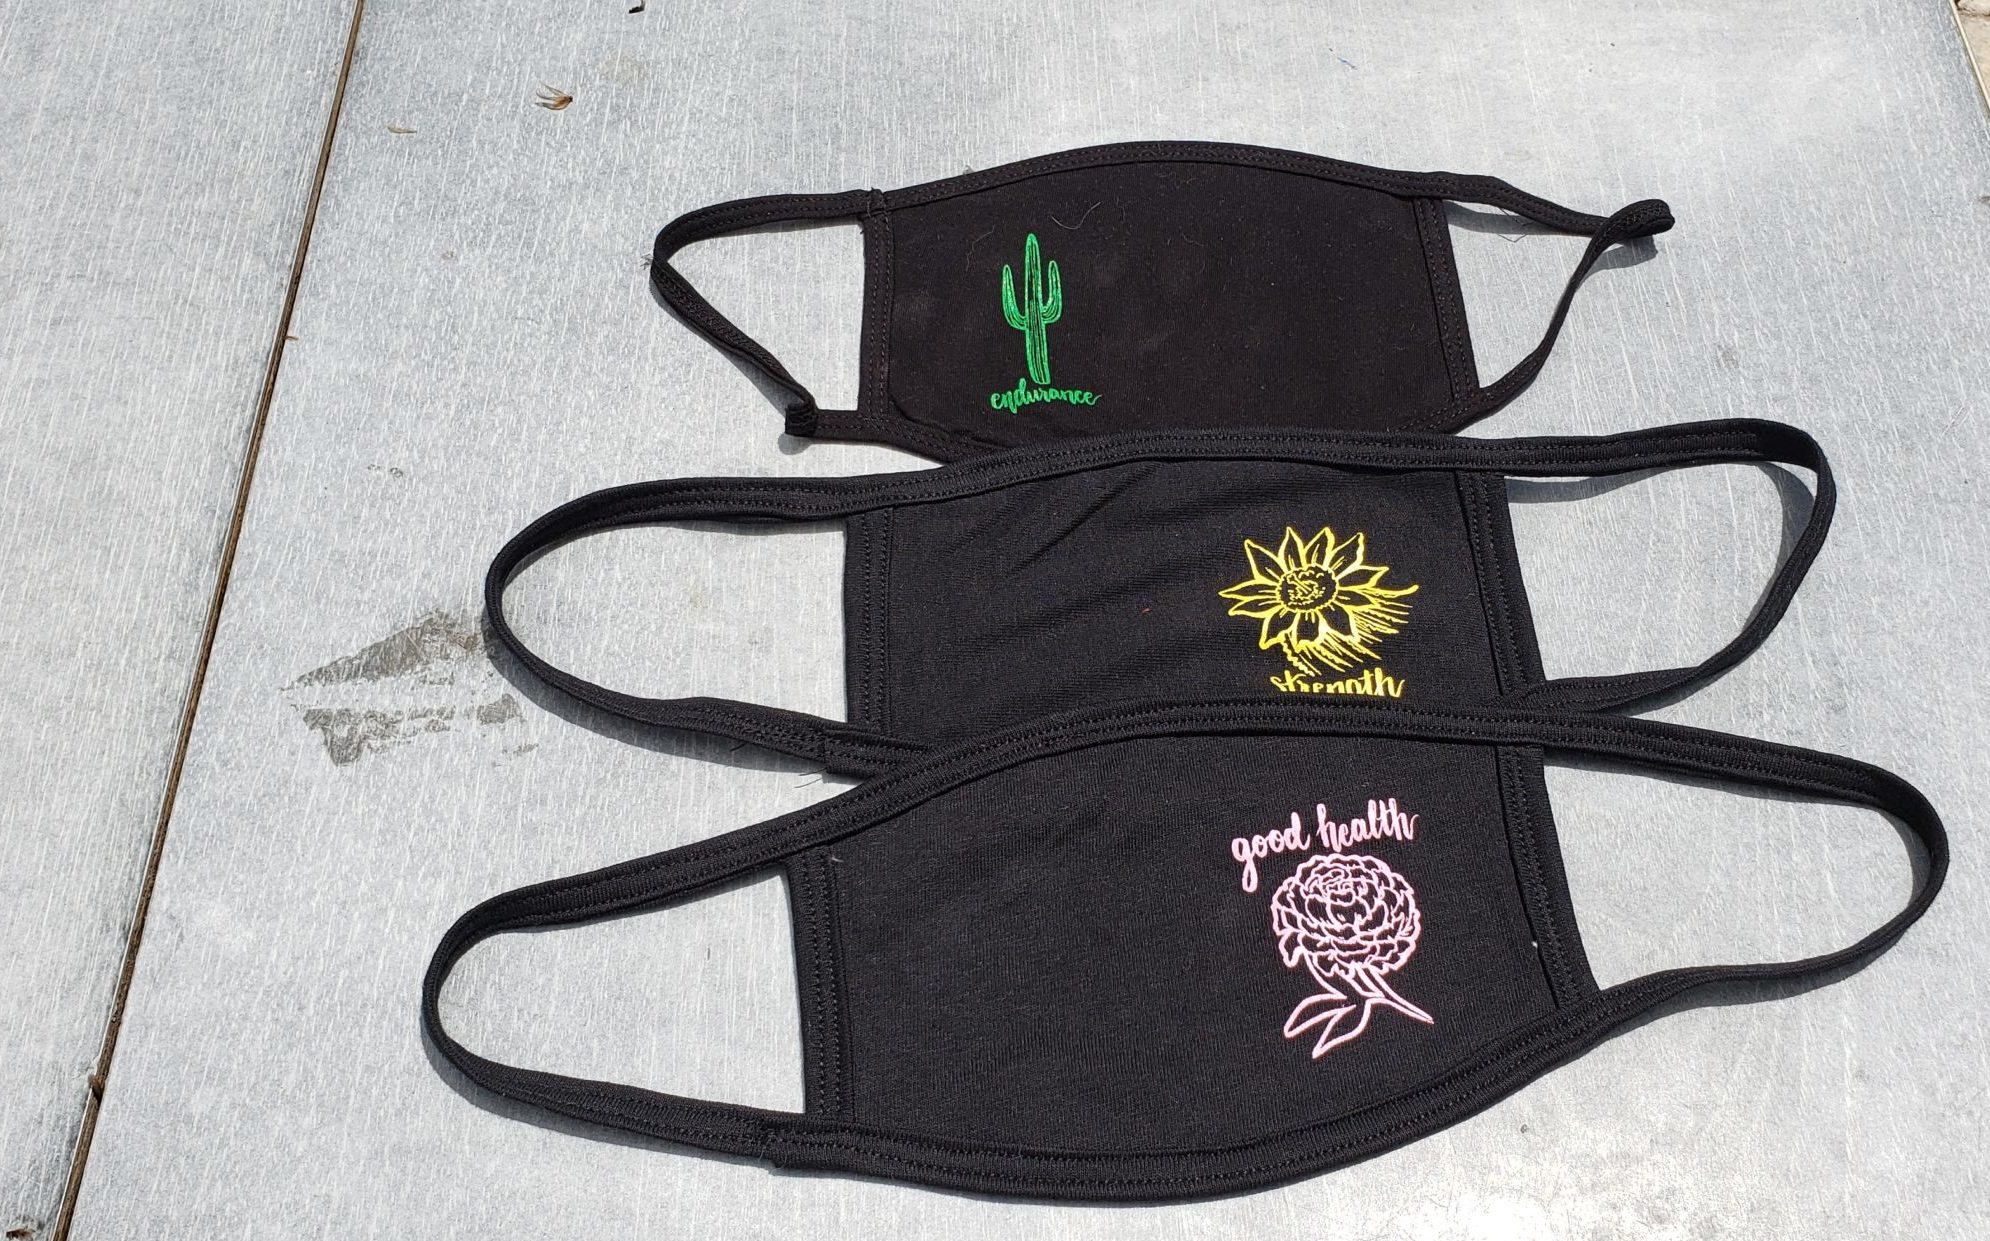 three handmade fair trade black face mask with screen printed designs on the sides of the masks. The three designs from front to back are of a soft pink chrysanthemum with the text, "good health" above it in cursive, a yellow sunflower motif with the word, "Strength" below it, and a green two-limbed saguaro cactus with the word, "endurance" below it.